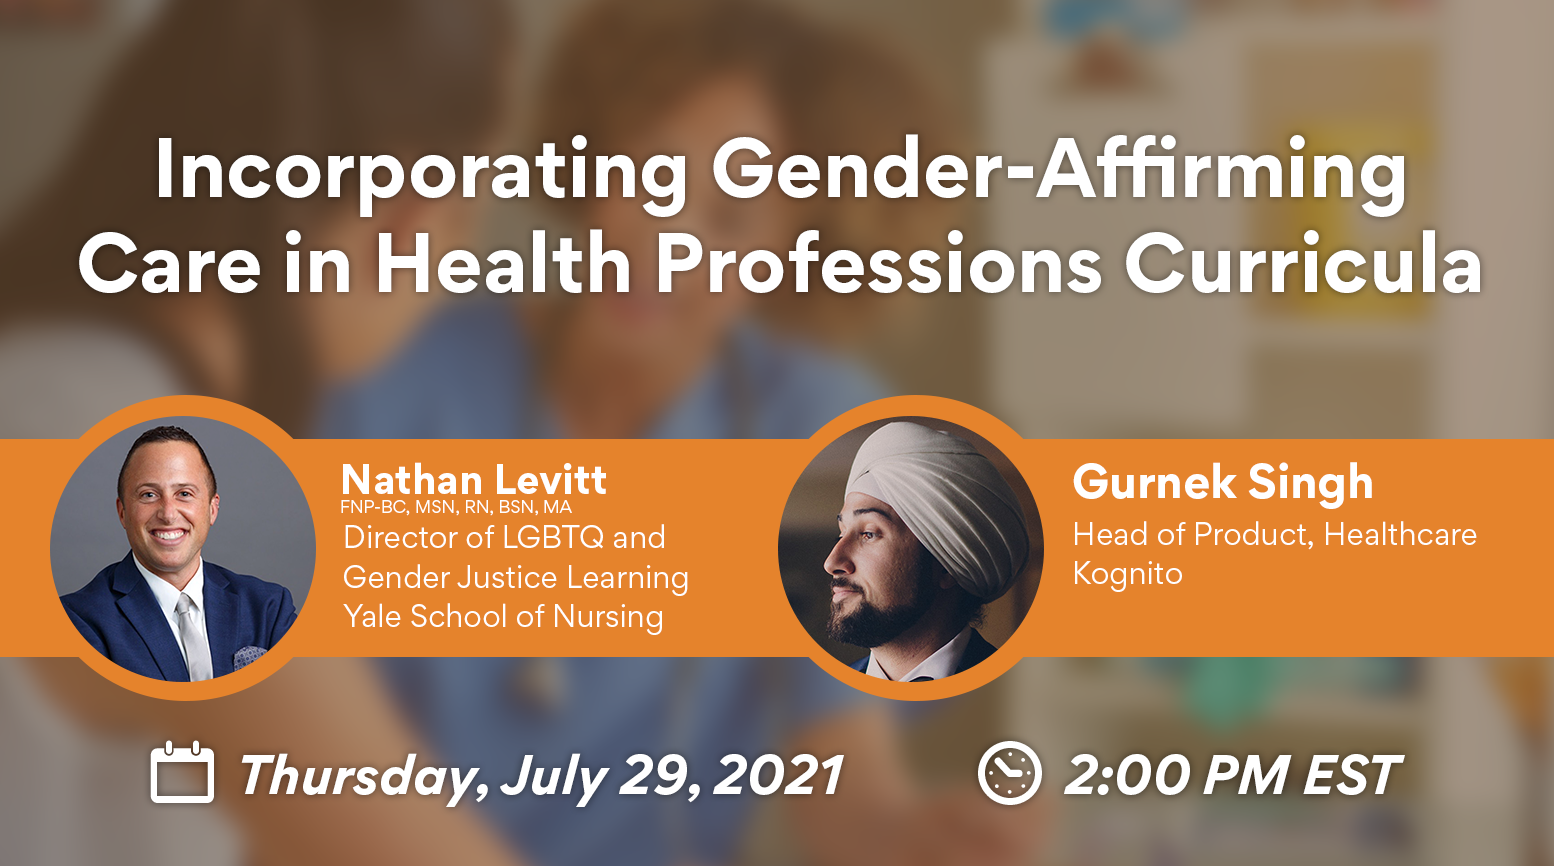 Incorporating Gender-Affirming Care in Health Professions Curricula